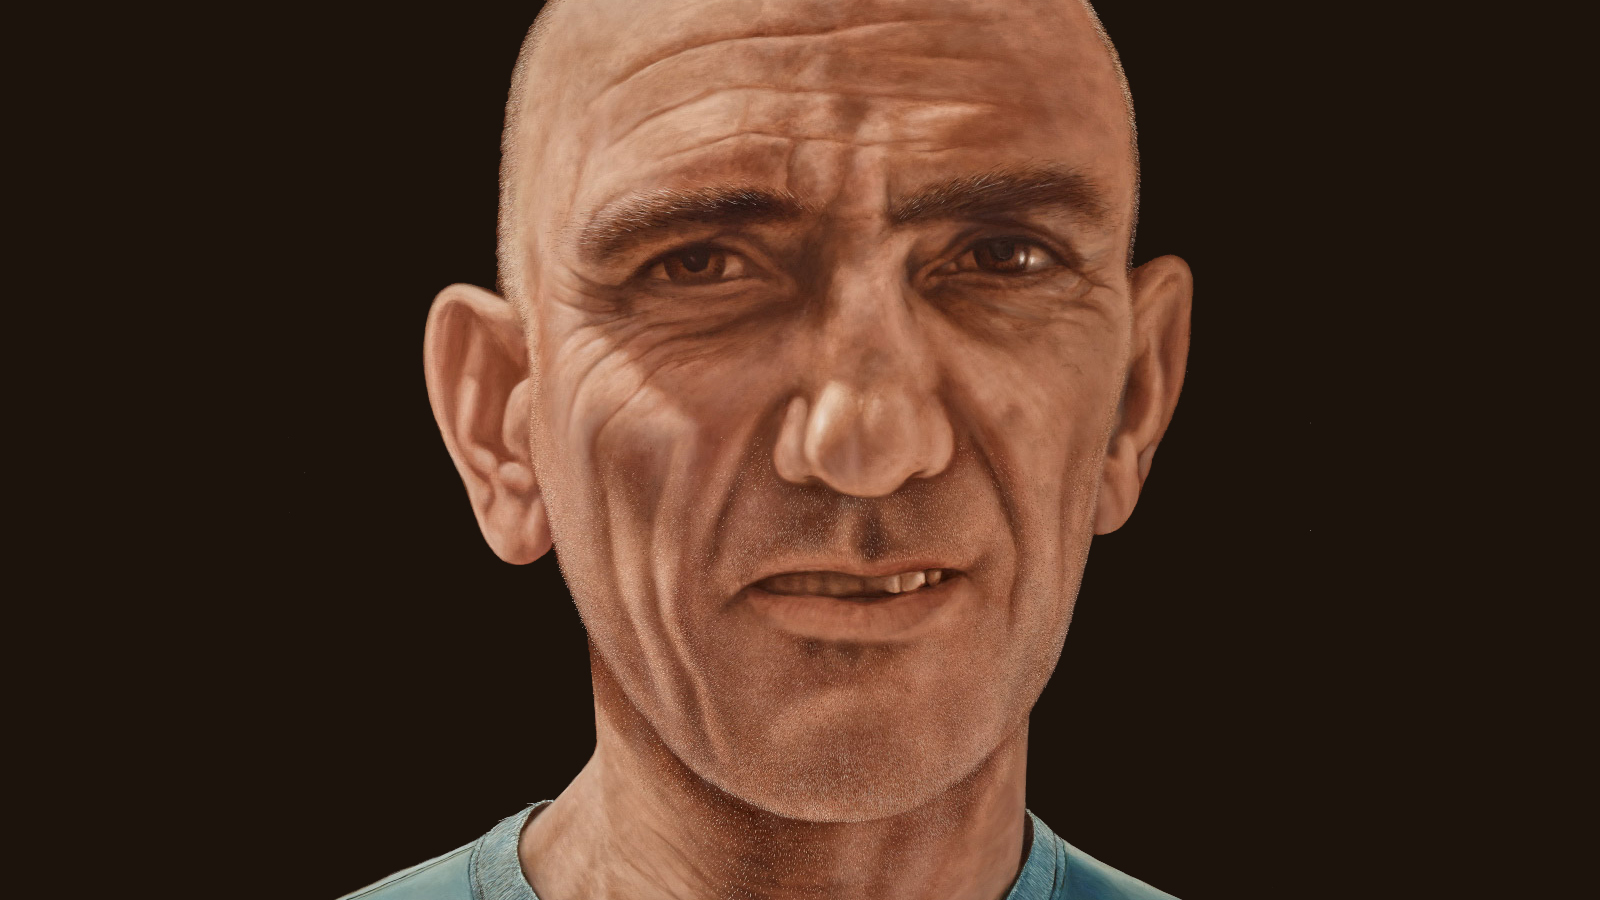 A painting of a man with no hair and blue top facing forward.